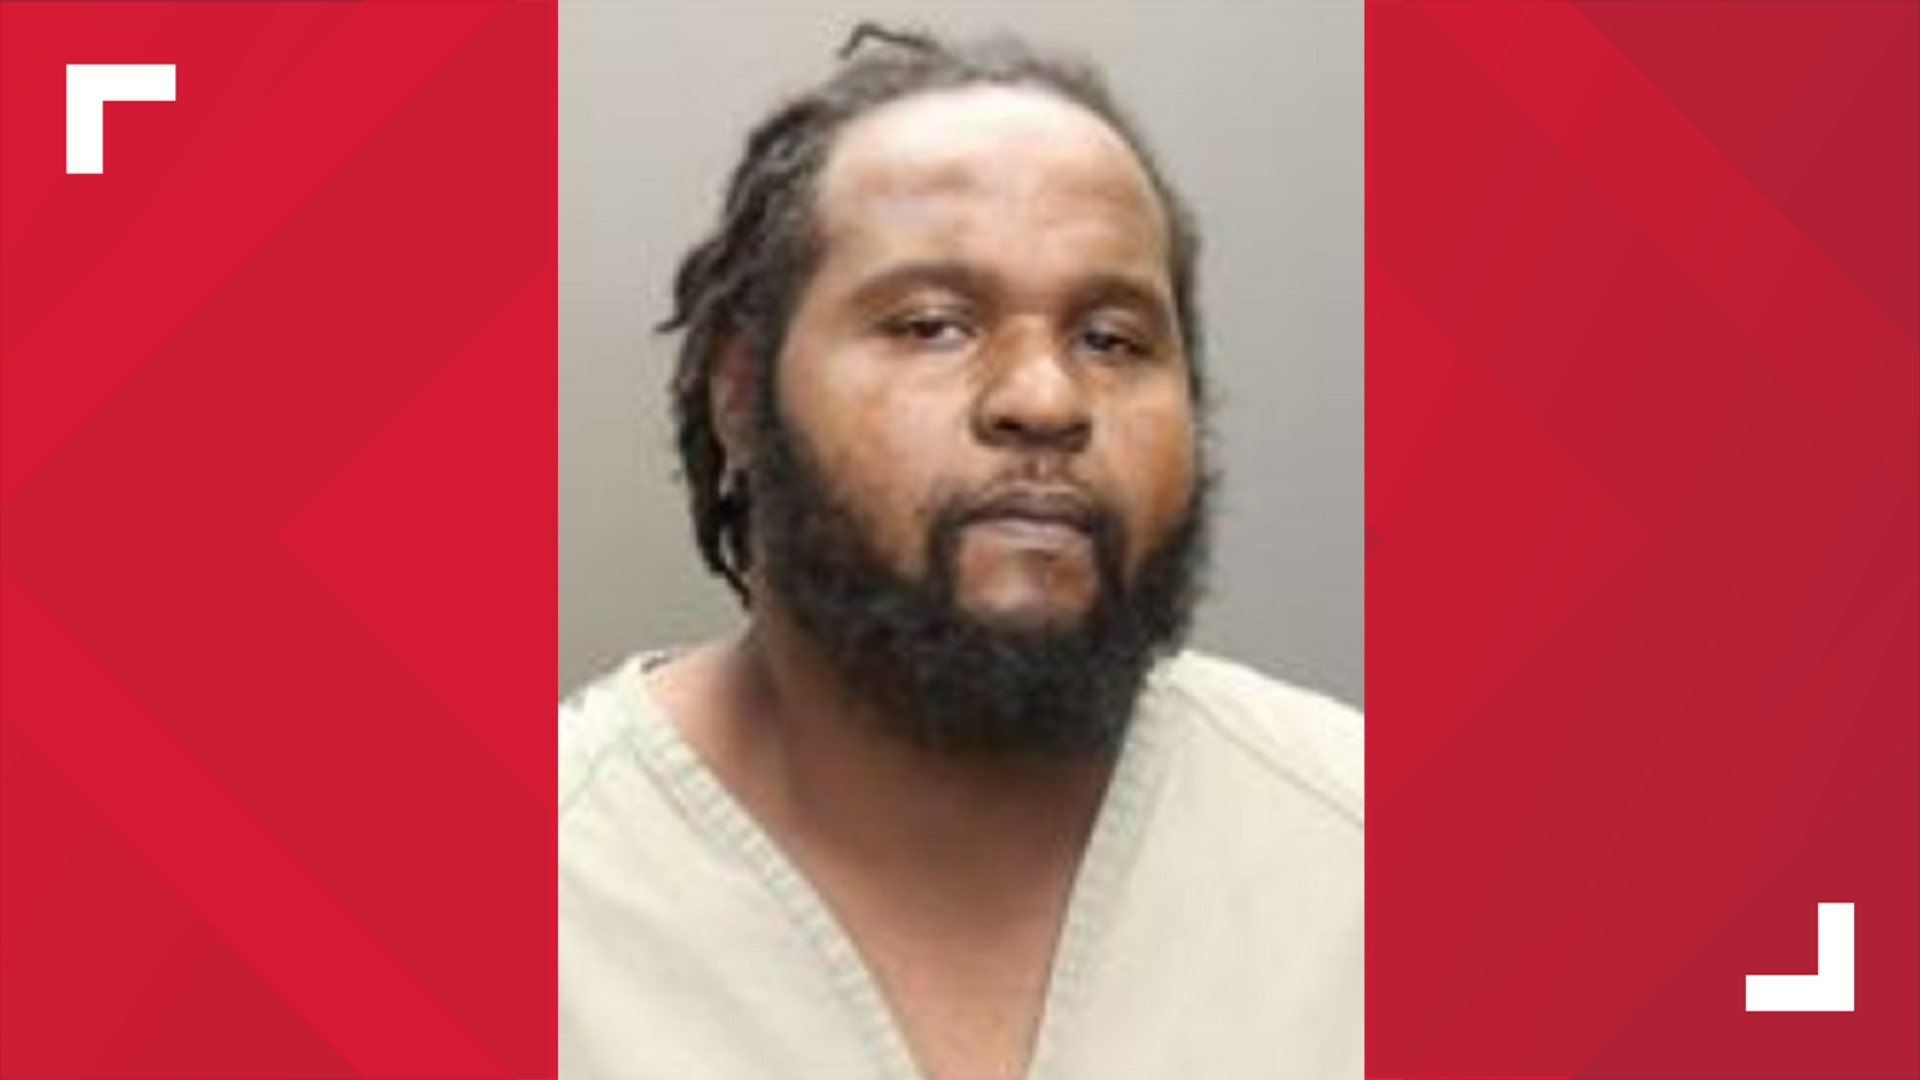 Charles Williams Jr. shot Jeffrey Chandler and has been charged with murder.